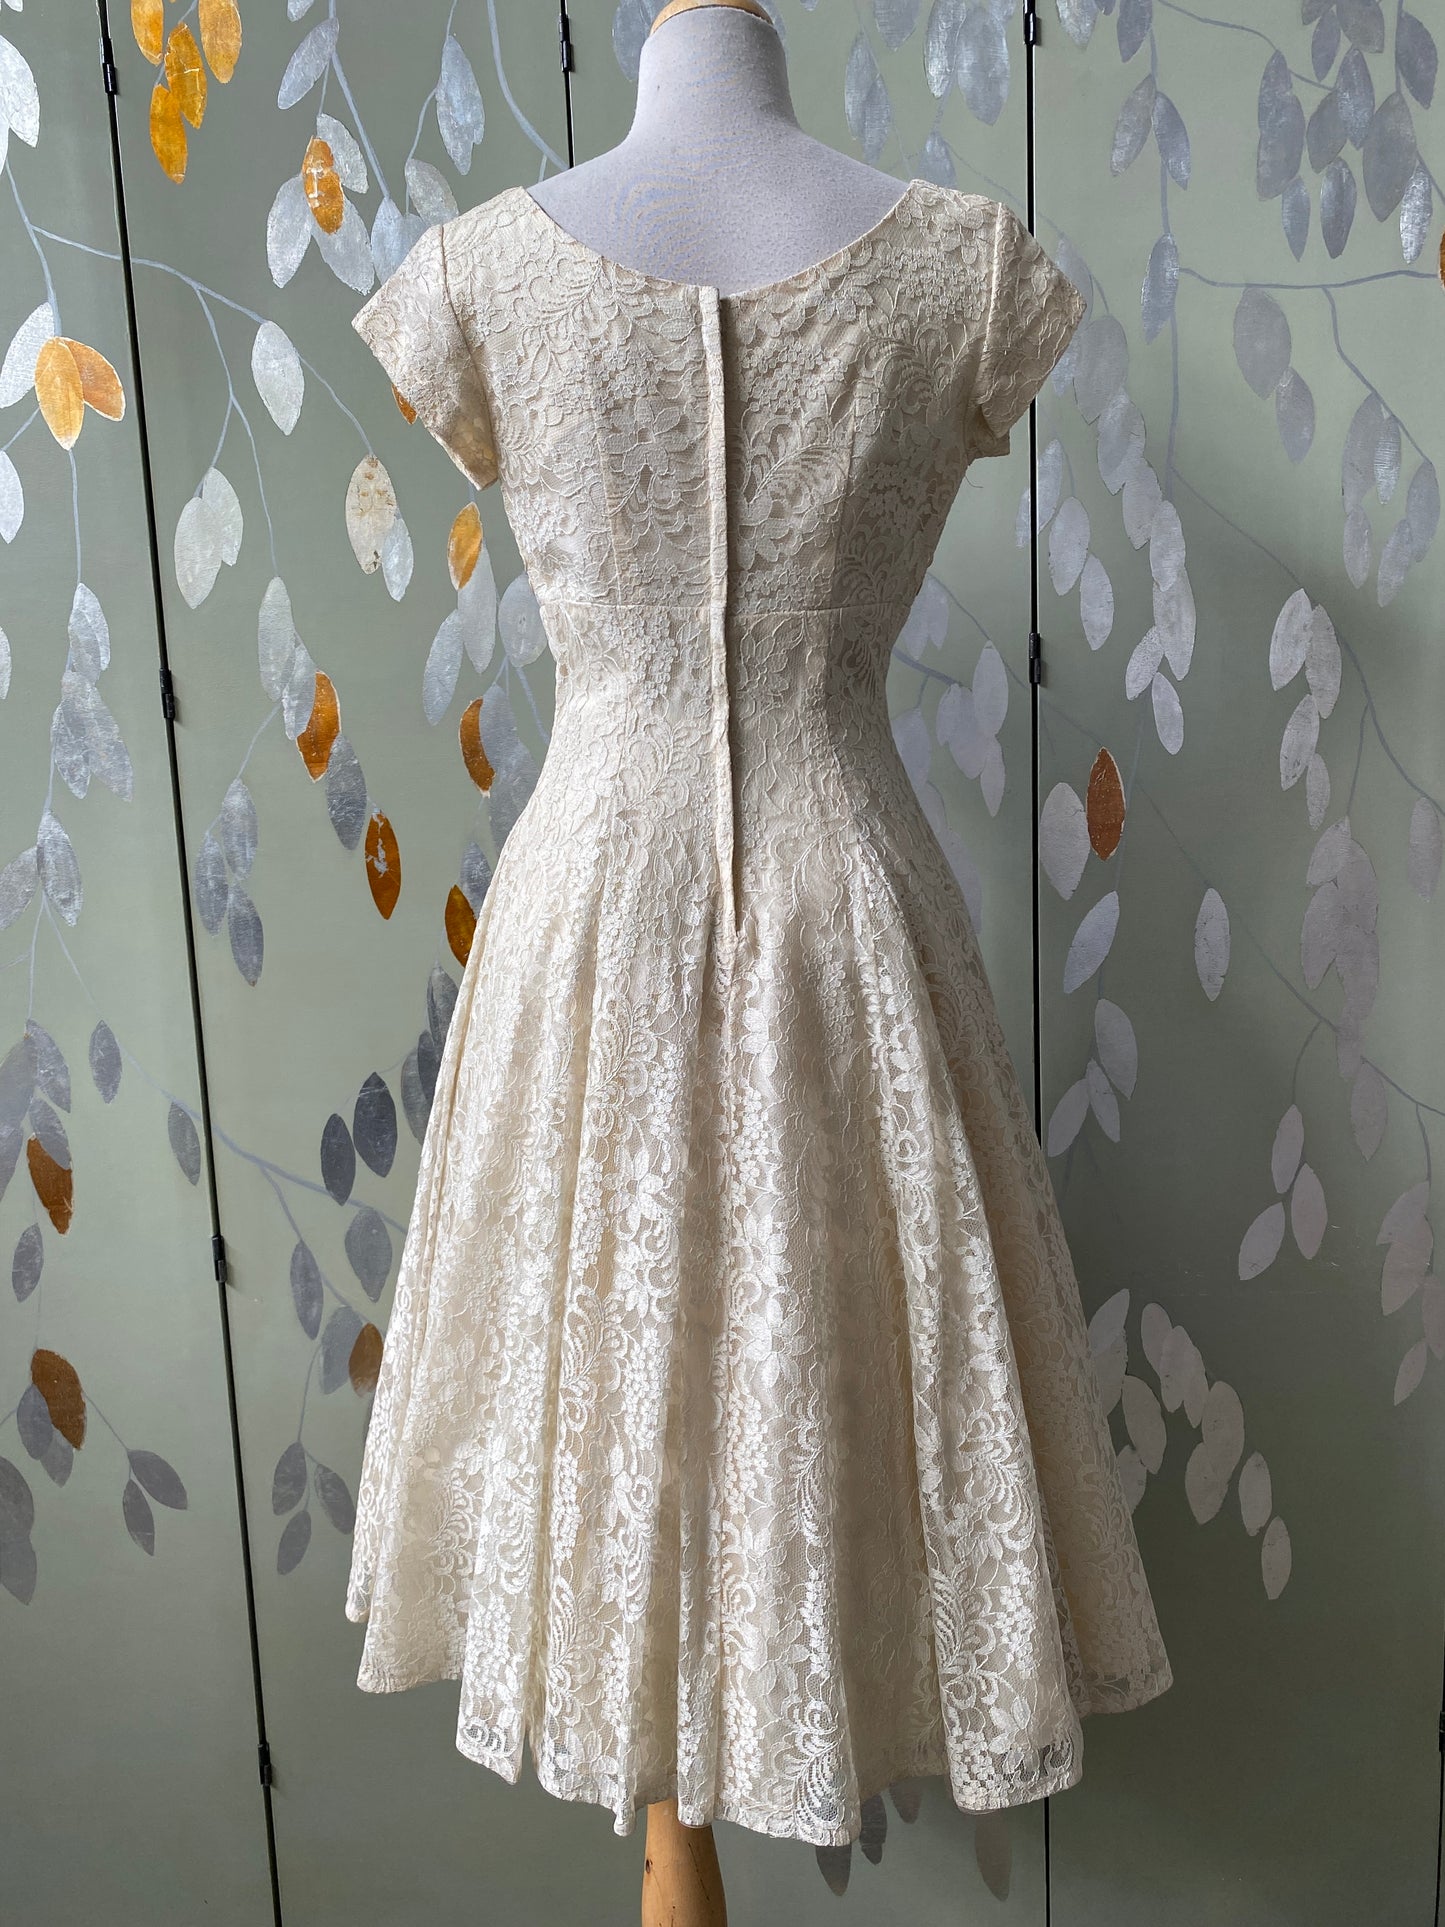 Vintage 1950s Cream Lace Cocktail Dress with Embellished Bodice, B34"